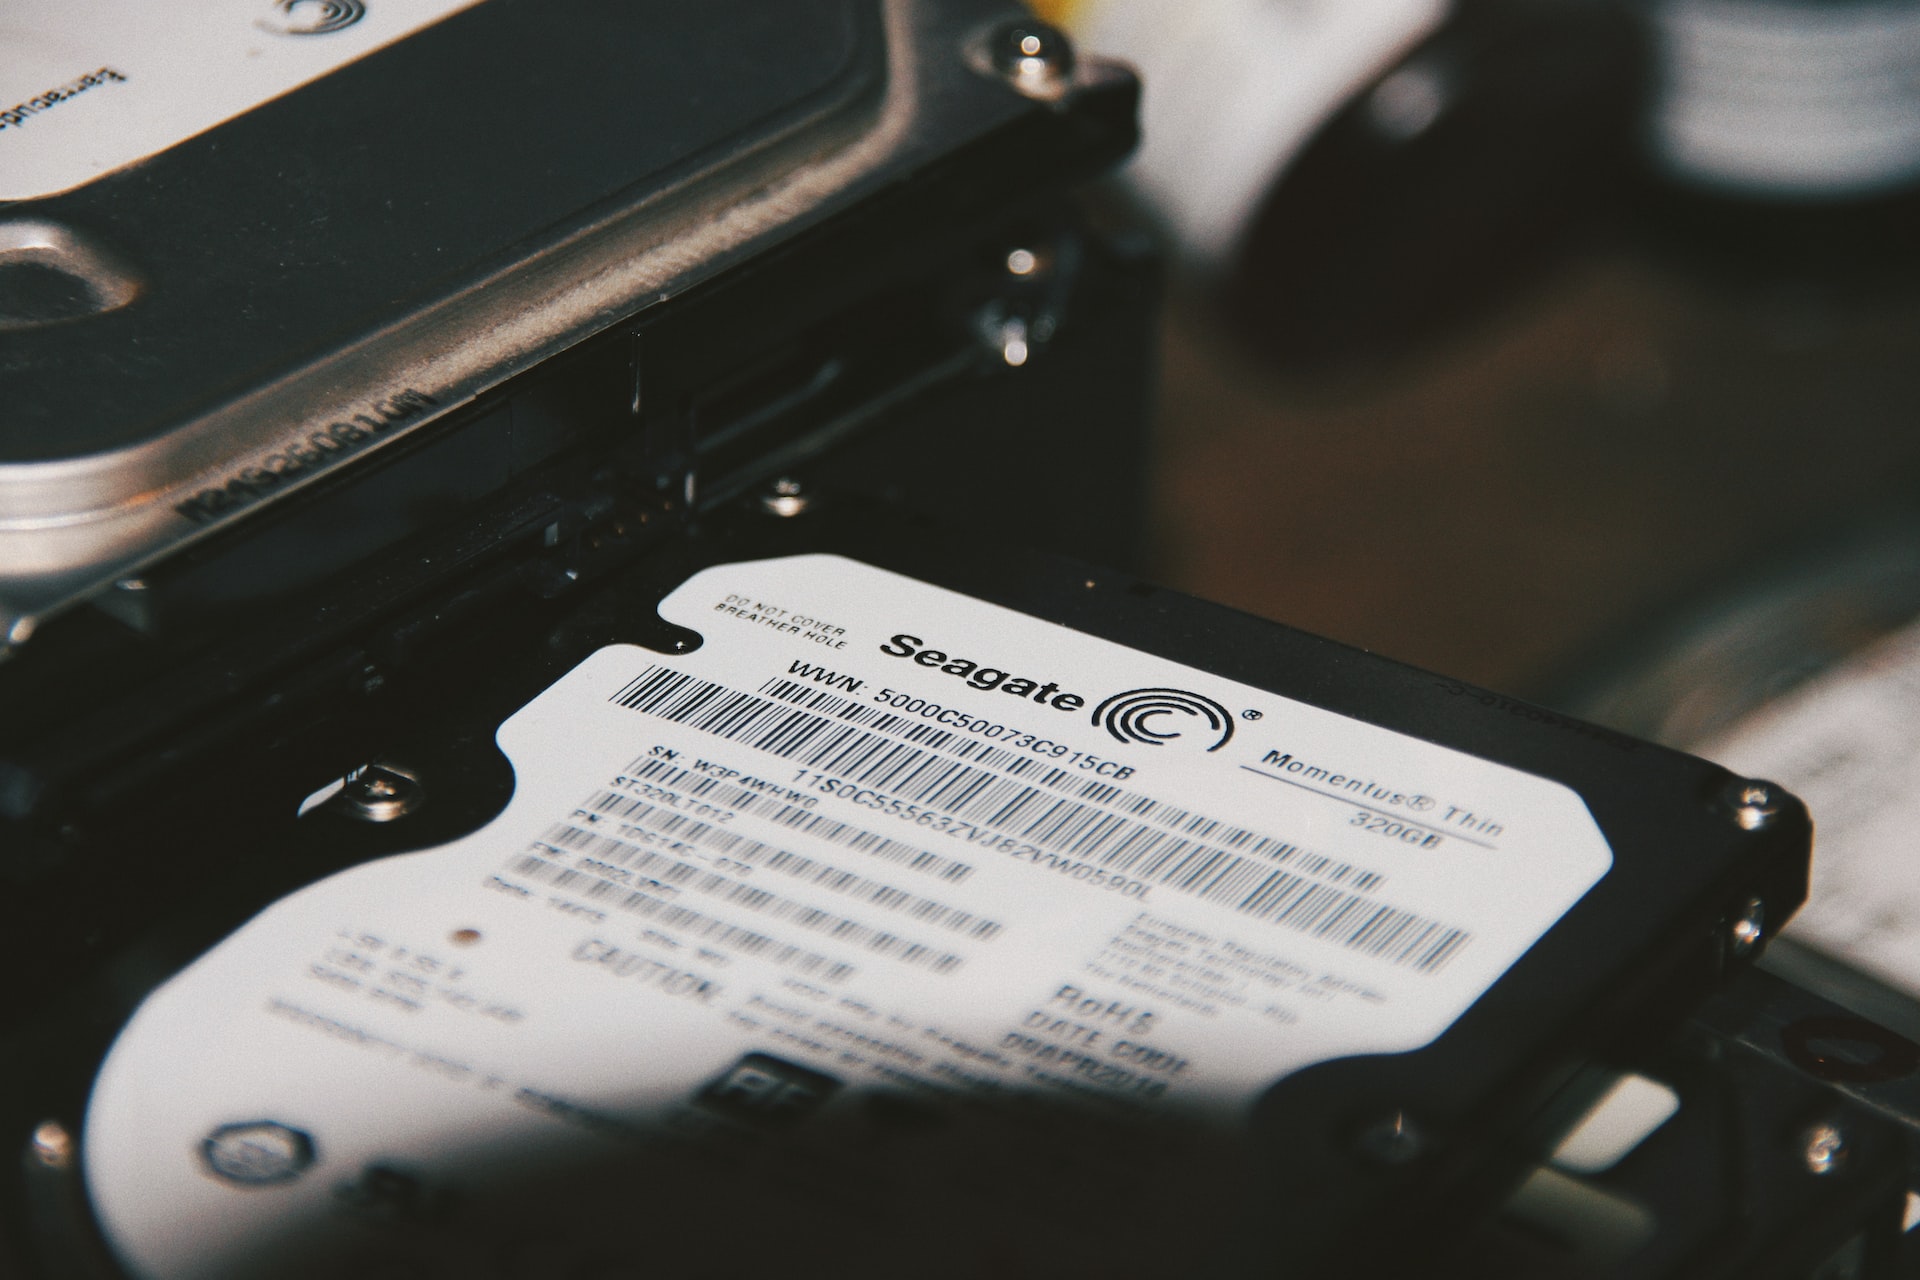 Seagate was one of the hardest hit HDD manufacturers in 2022.